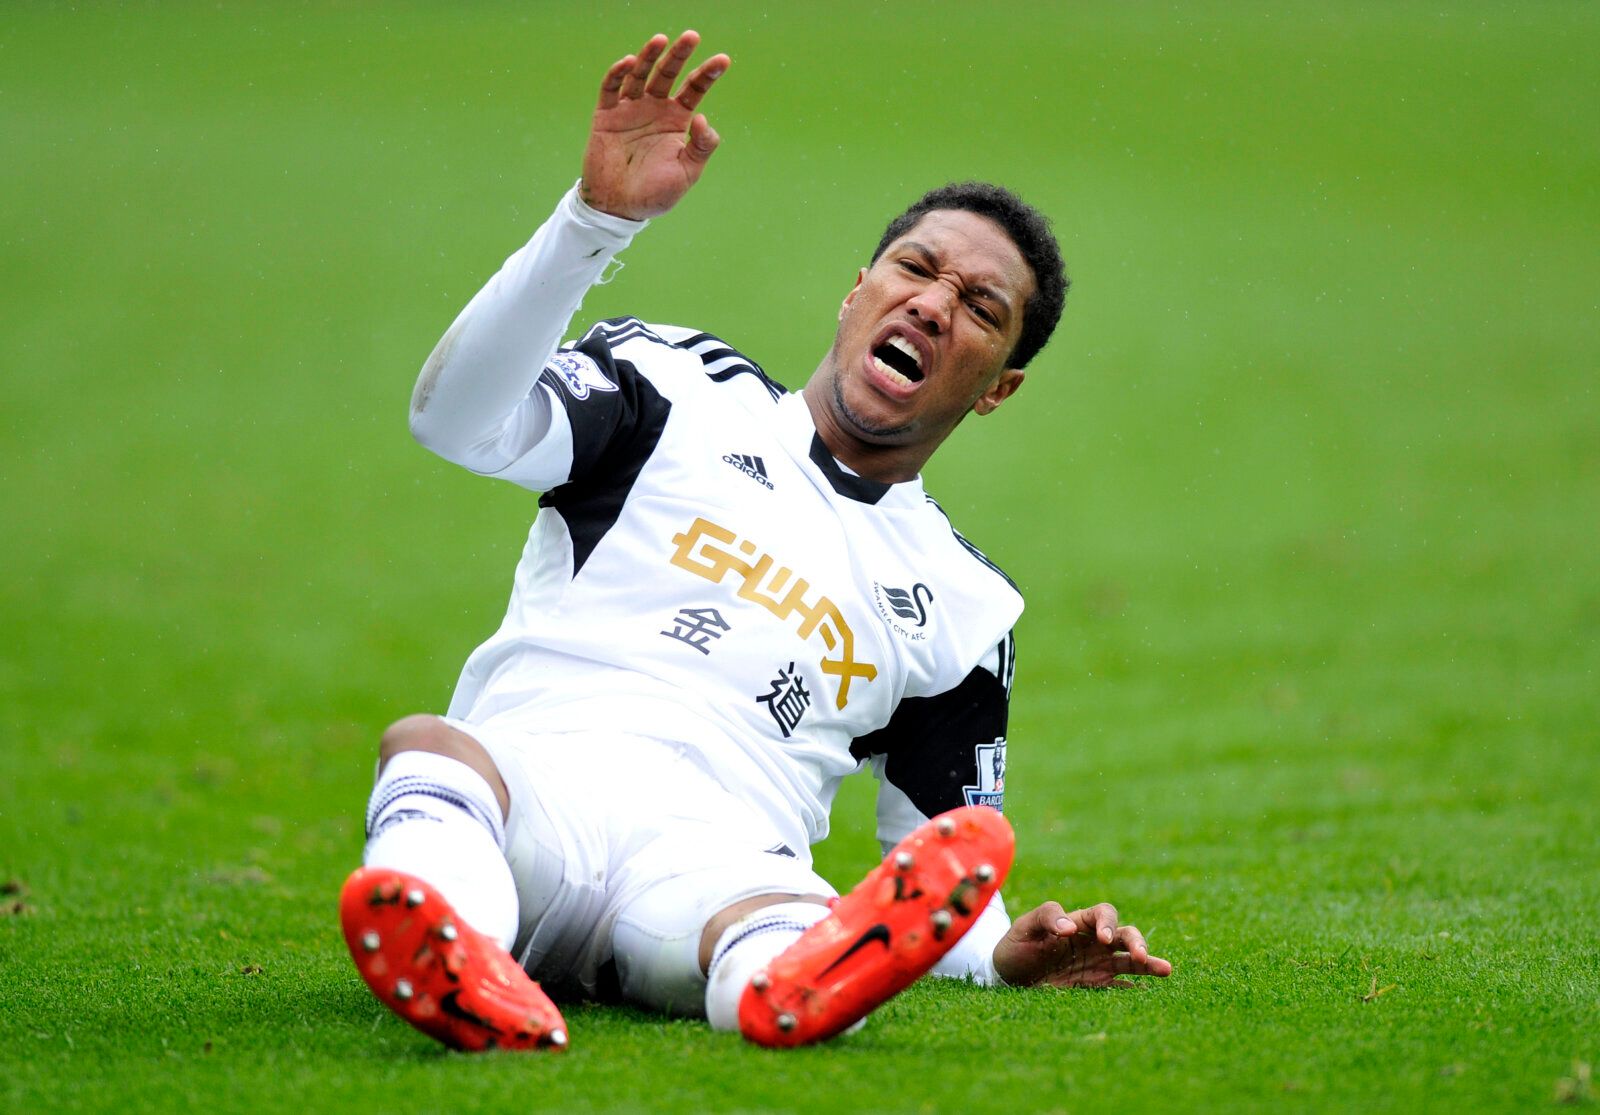 Football - Swansea City v Aston Villa - Barclays Premier League - Liberty Stadium - 26/4/14 
Swansea City's Jonathan De Guzman sits injured 
Mandatory Credit: Action Images / Adam Holt 
Livepic 
EDITORIAL USE ONLY. No use with unauthorized audio, video, data, fixture lists, club/league logos or 